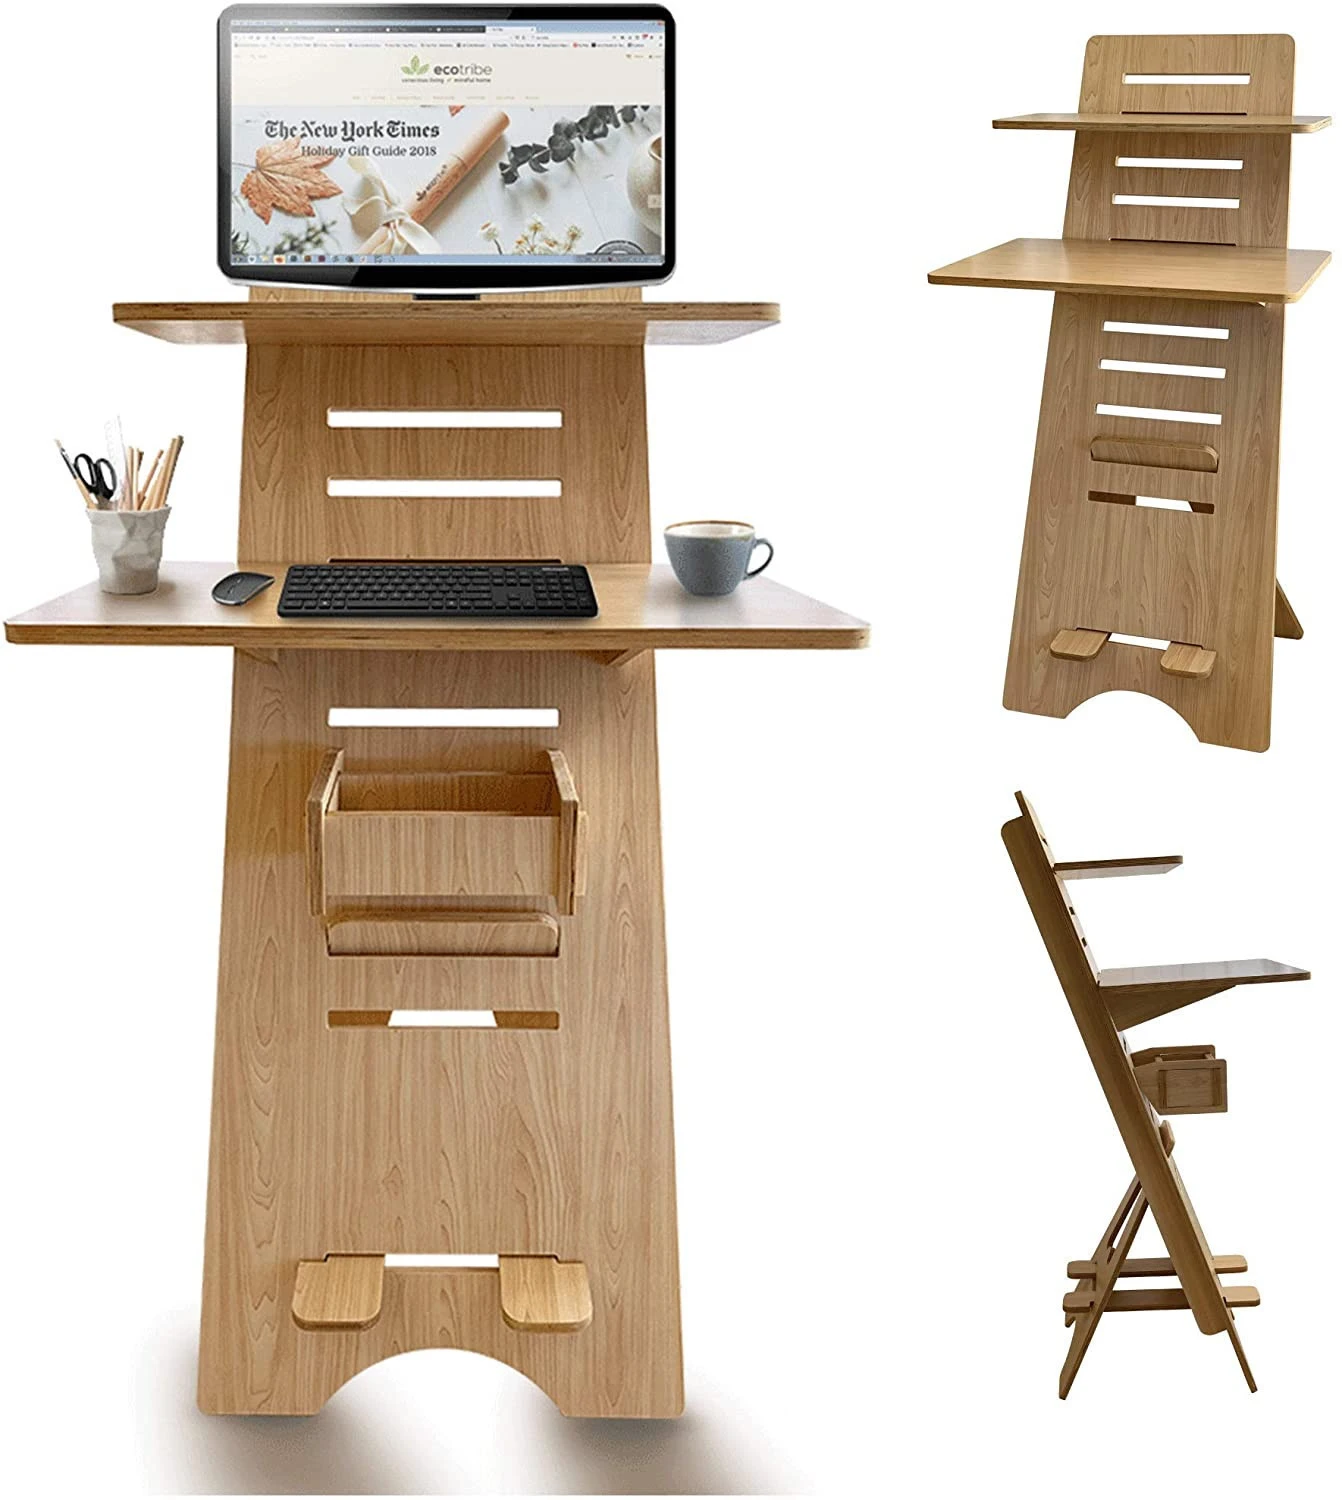 Wooden Easily Height Adjustable Sit to Stand Desk Perfect as Home Office Work Desks and Multi-Task Computer Table Workstation